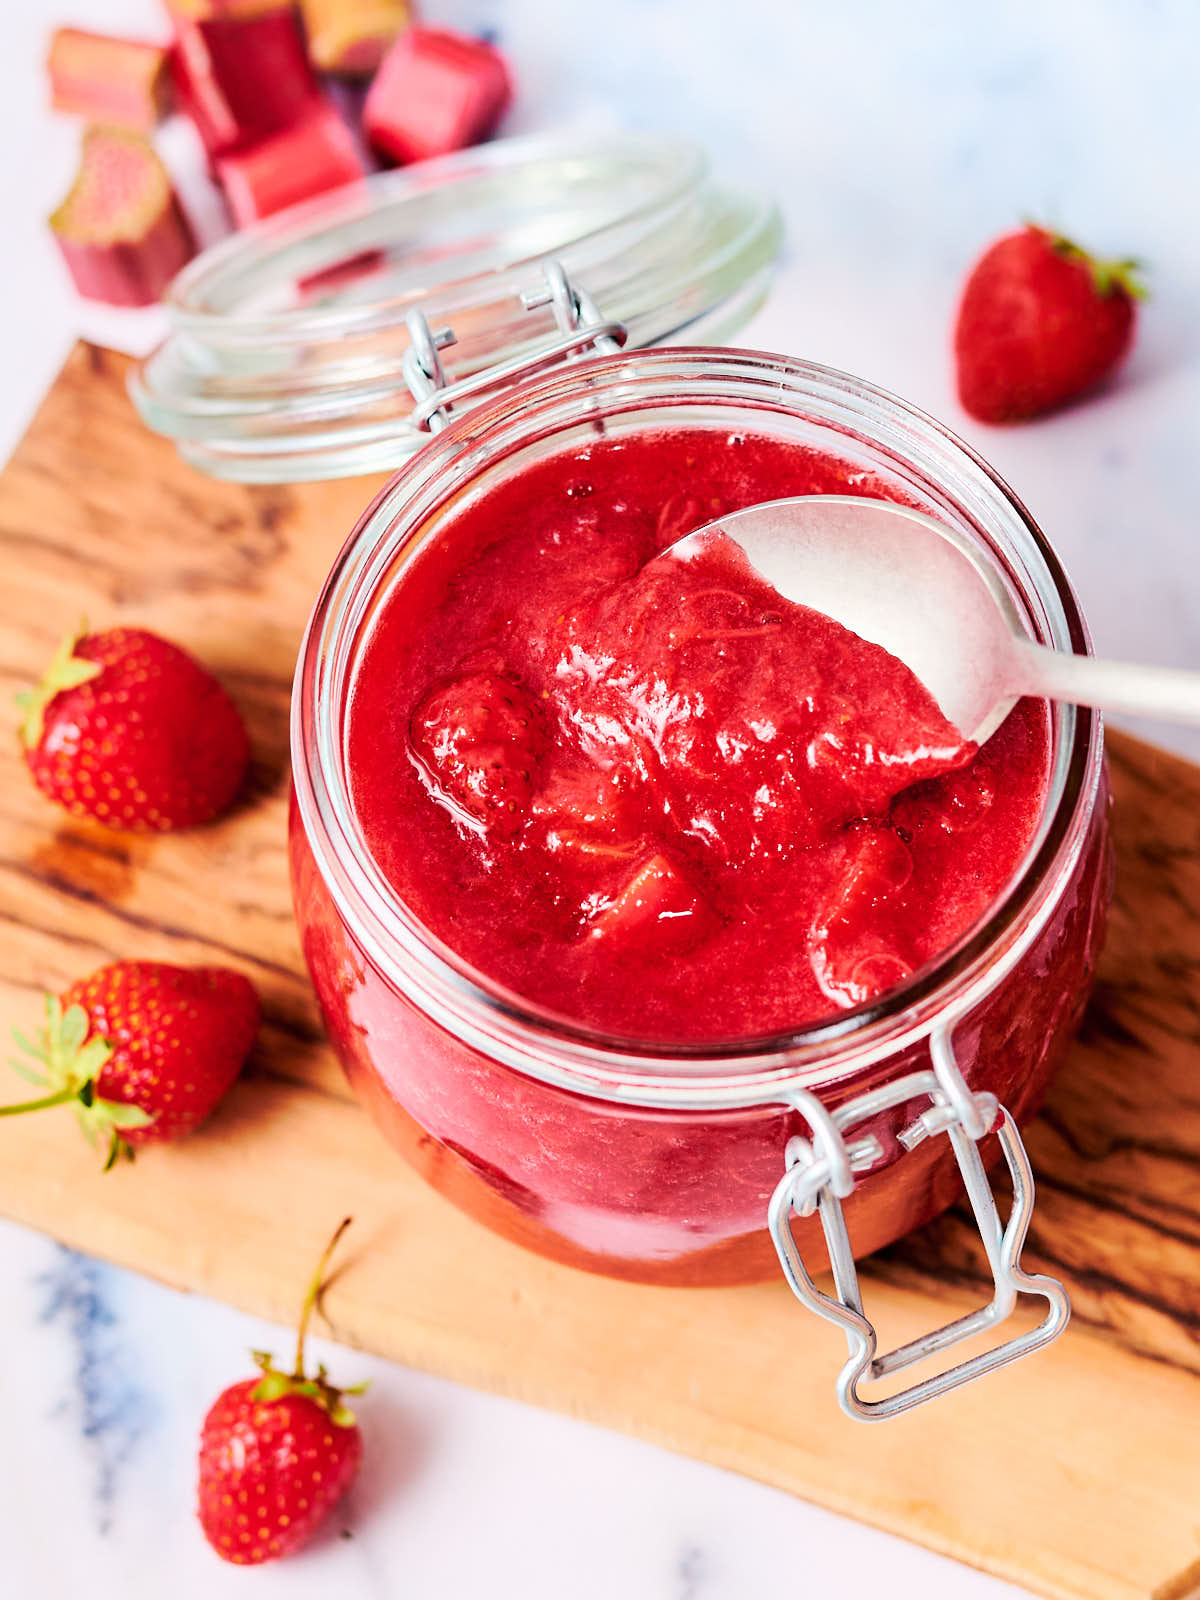 Strawberry Rhubarb Compote - Evergreen Kitchen